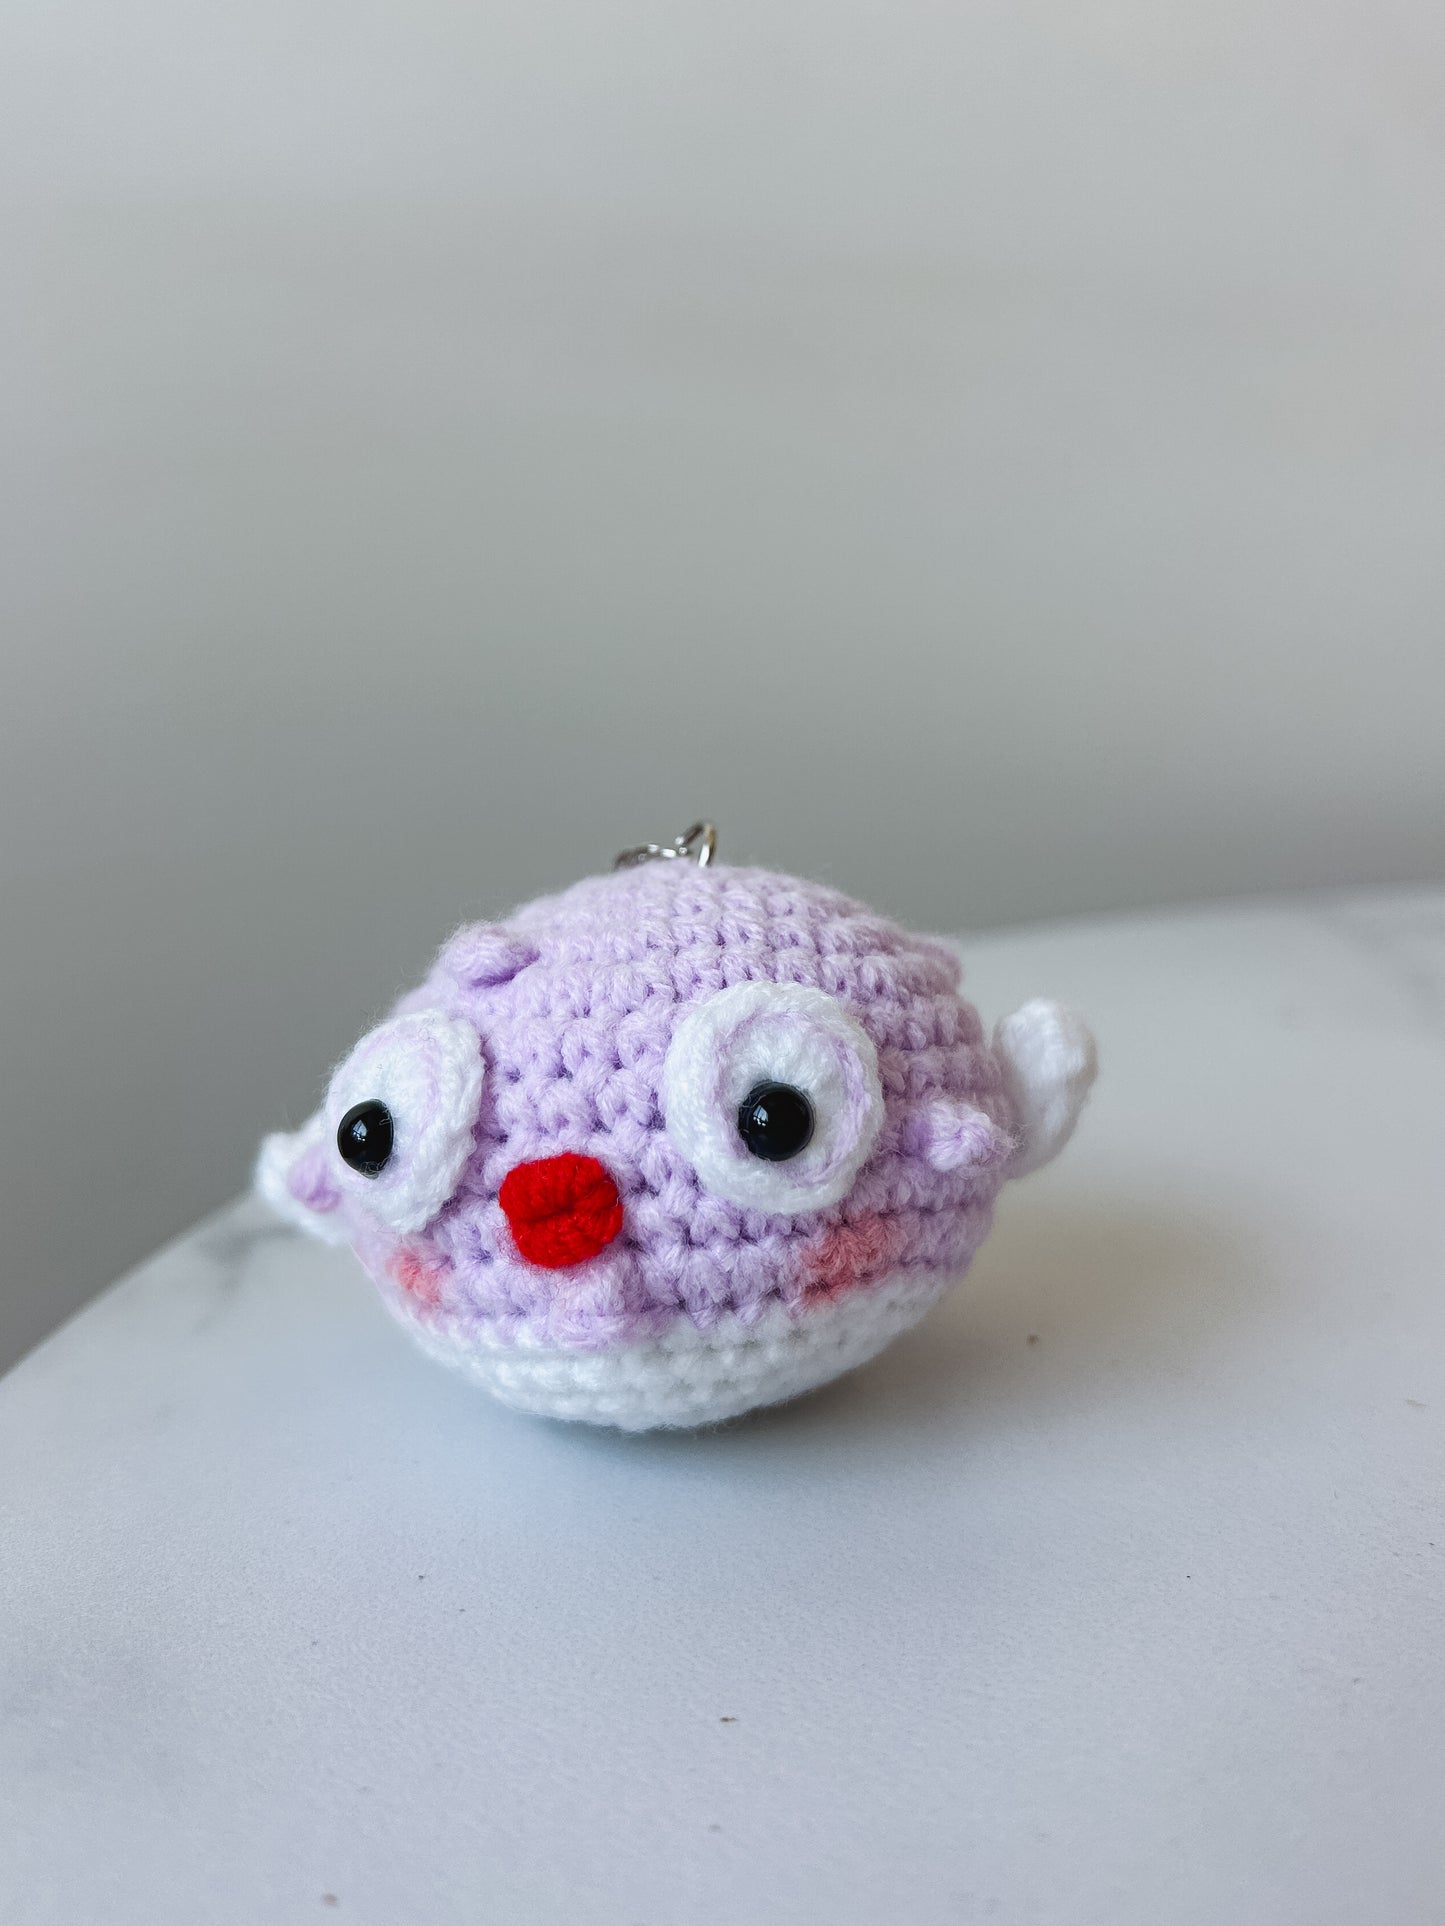 Puffer Fish Crochet Keychain - Quirky Accessory for Keys and decor